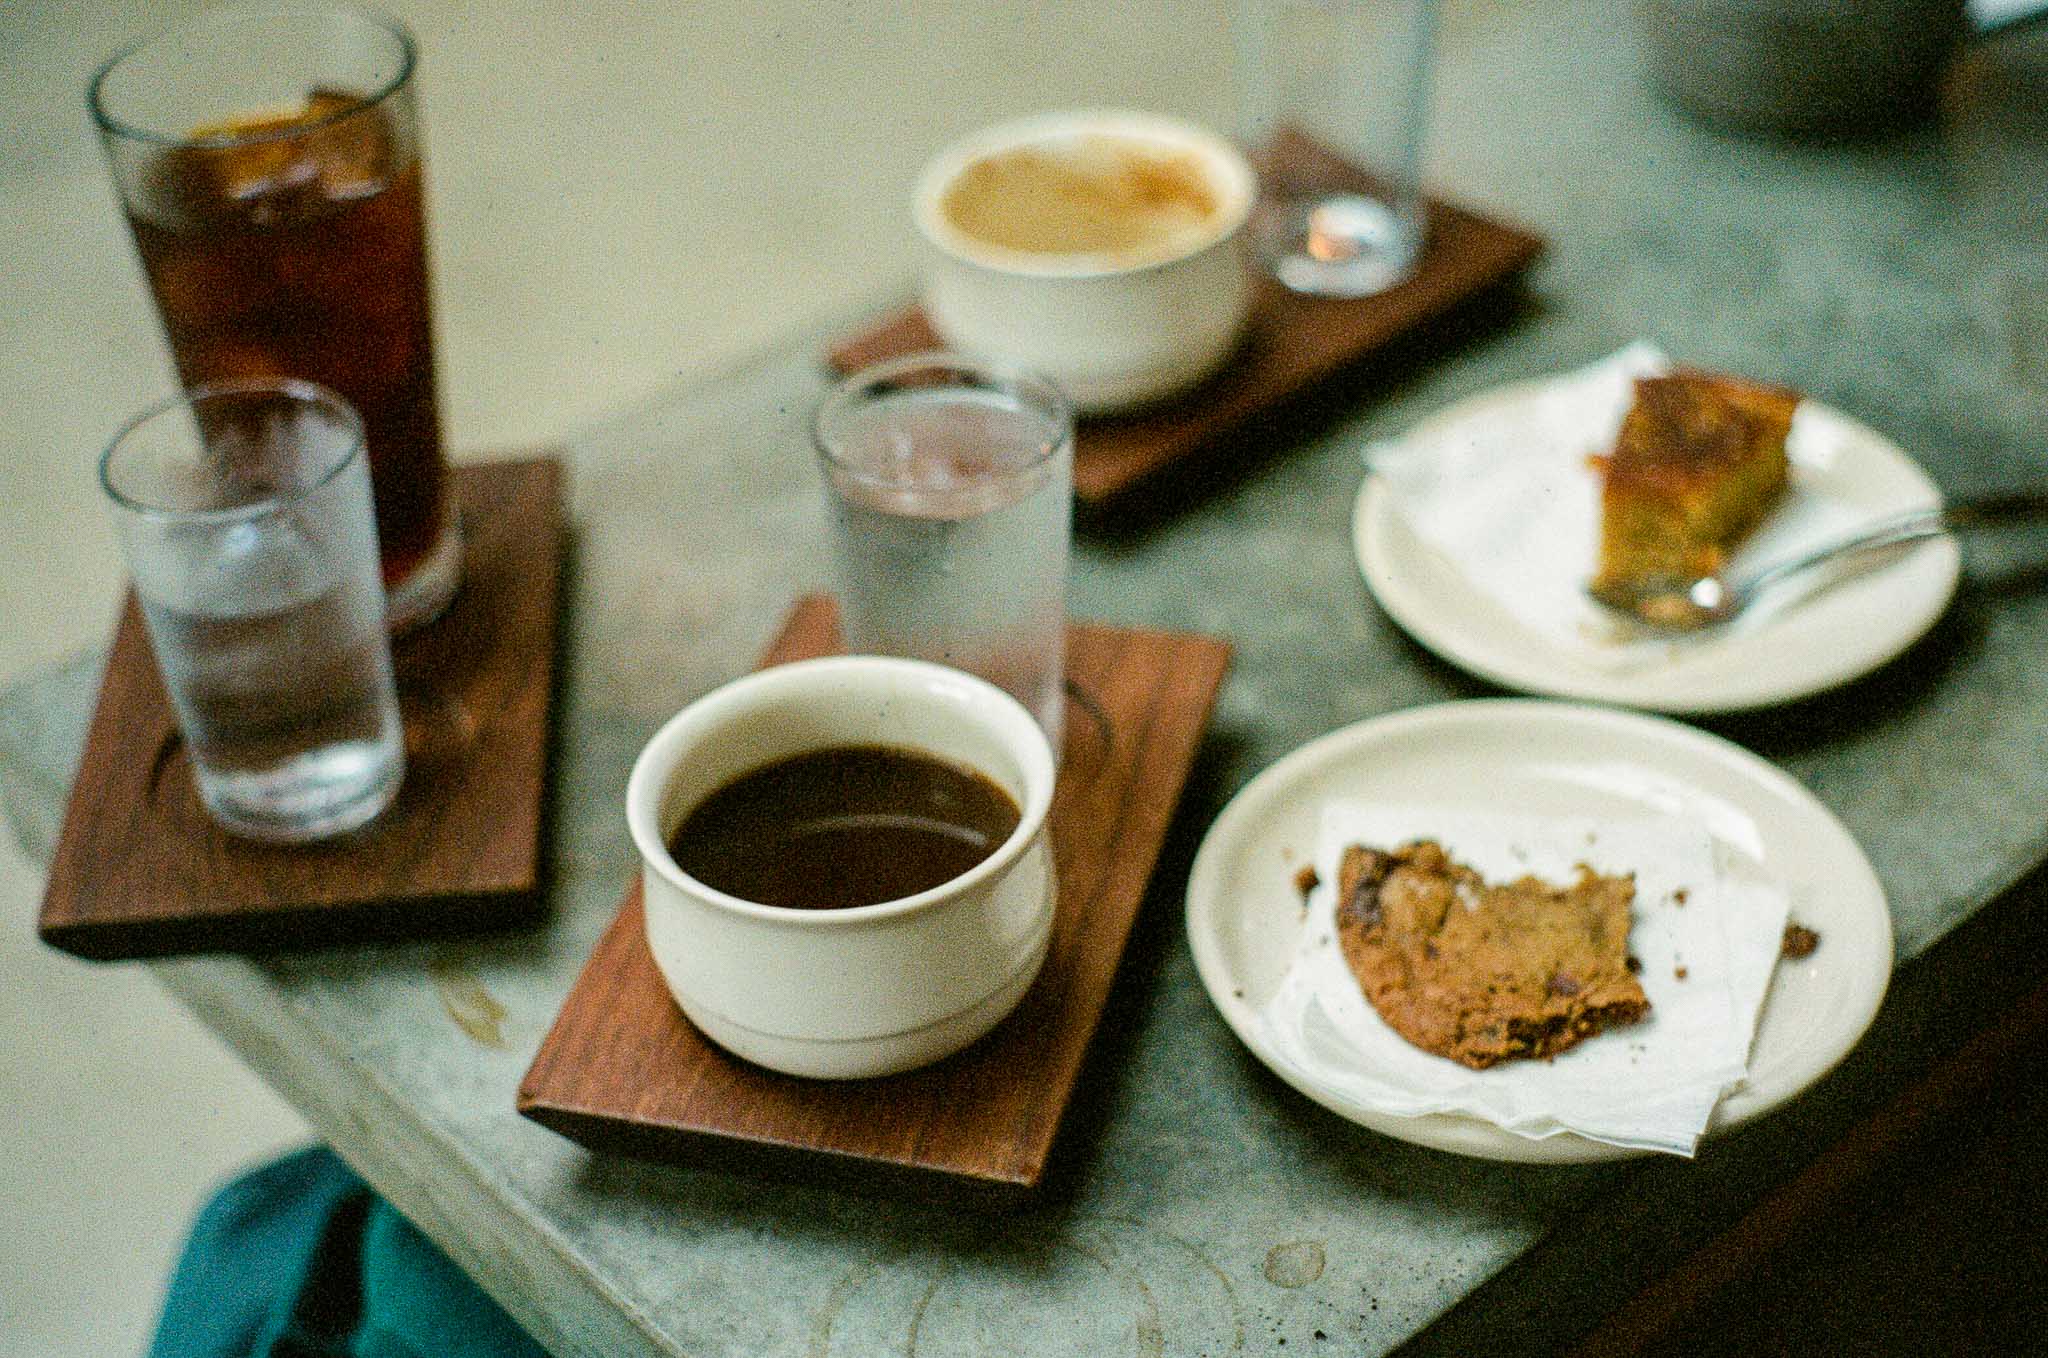 A table filled with wooden platters and plates of coffee and pastries at Sey Coffee in Brooklyn New York